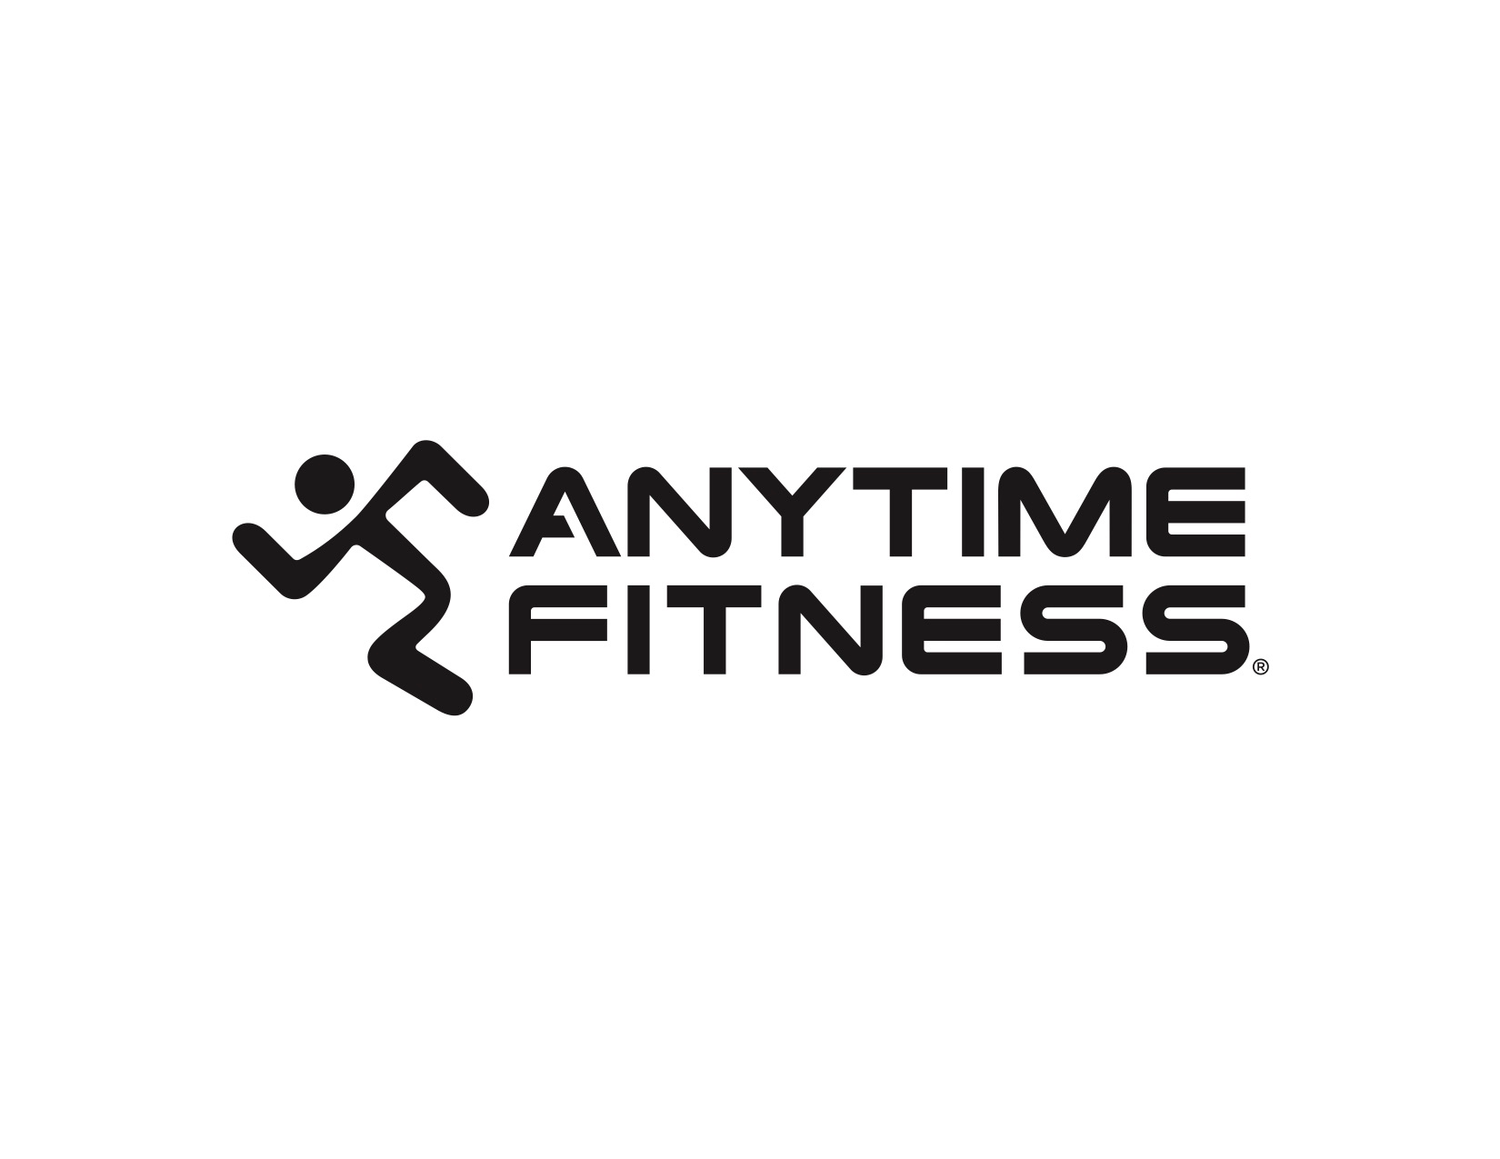 Anytime Fitness Stacked Logo